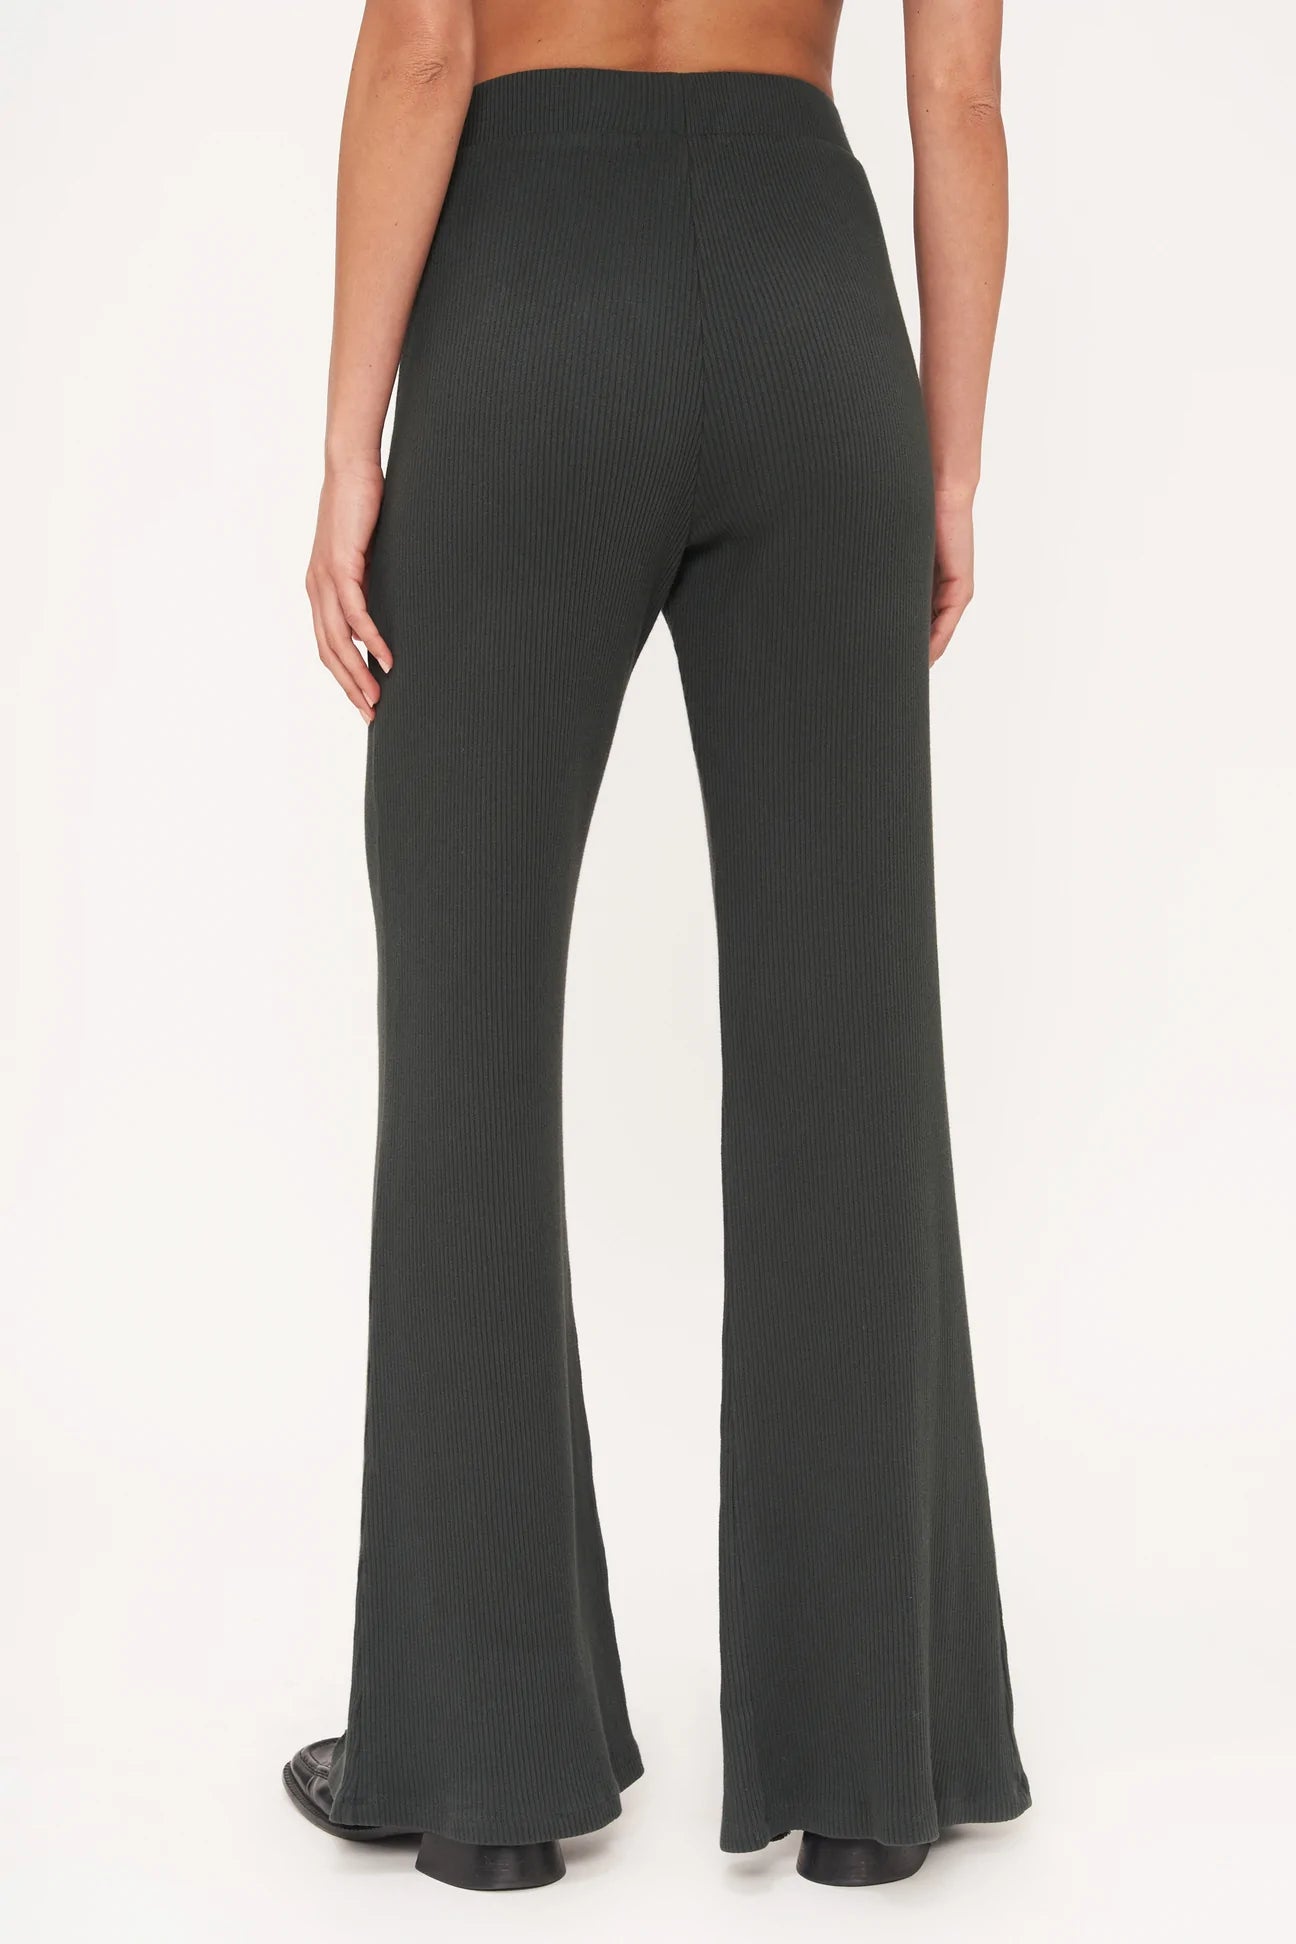 Dylan Front Slit Rib Pant- Midnight Forest